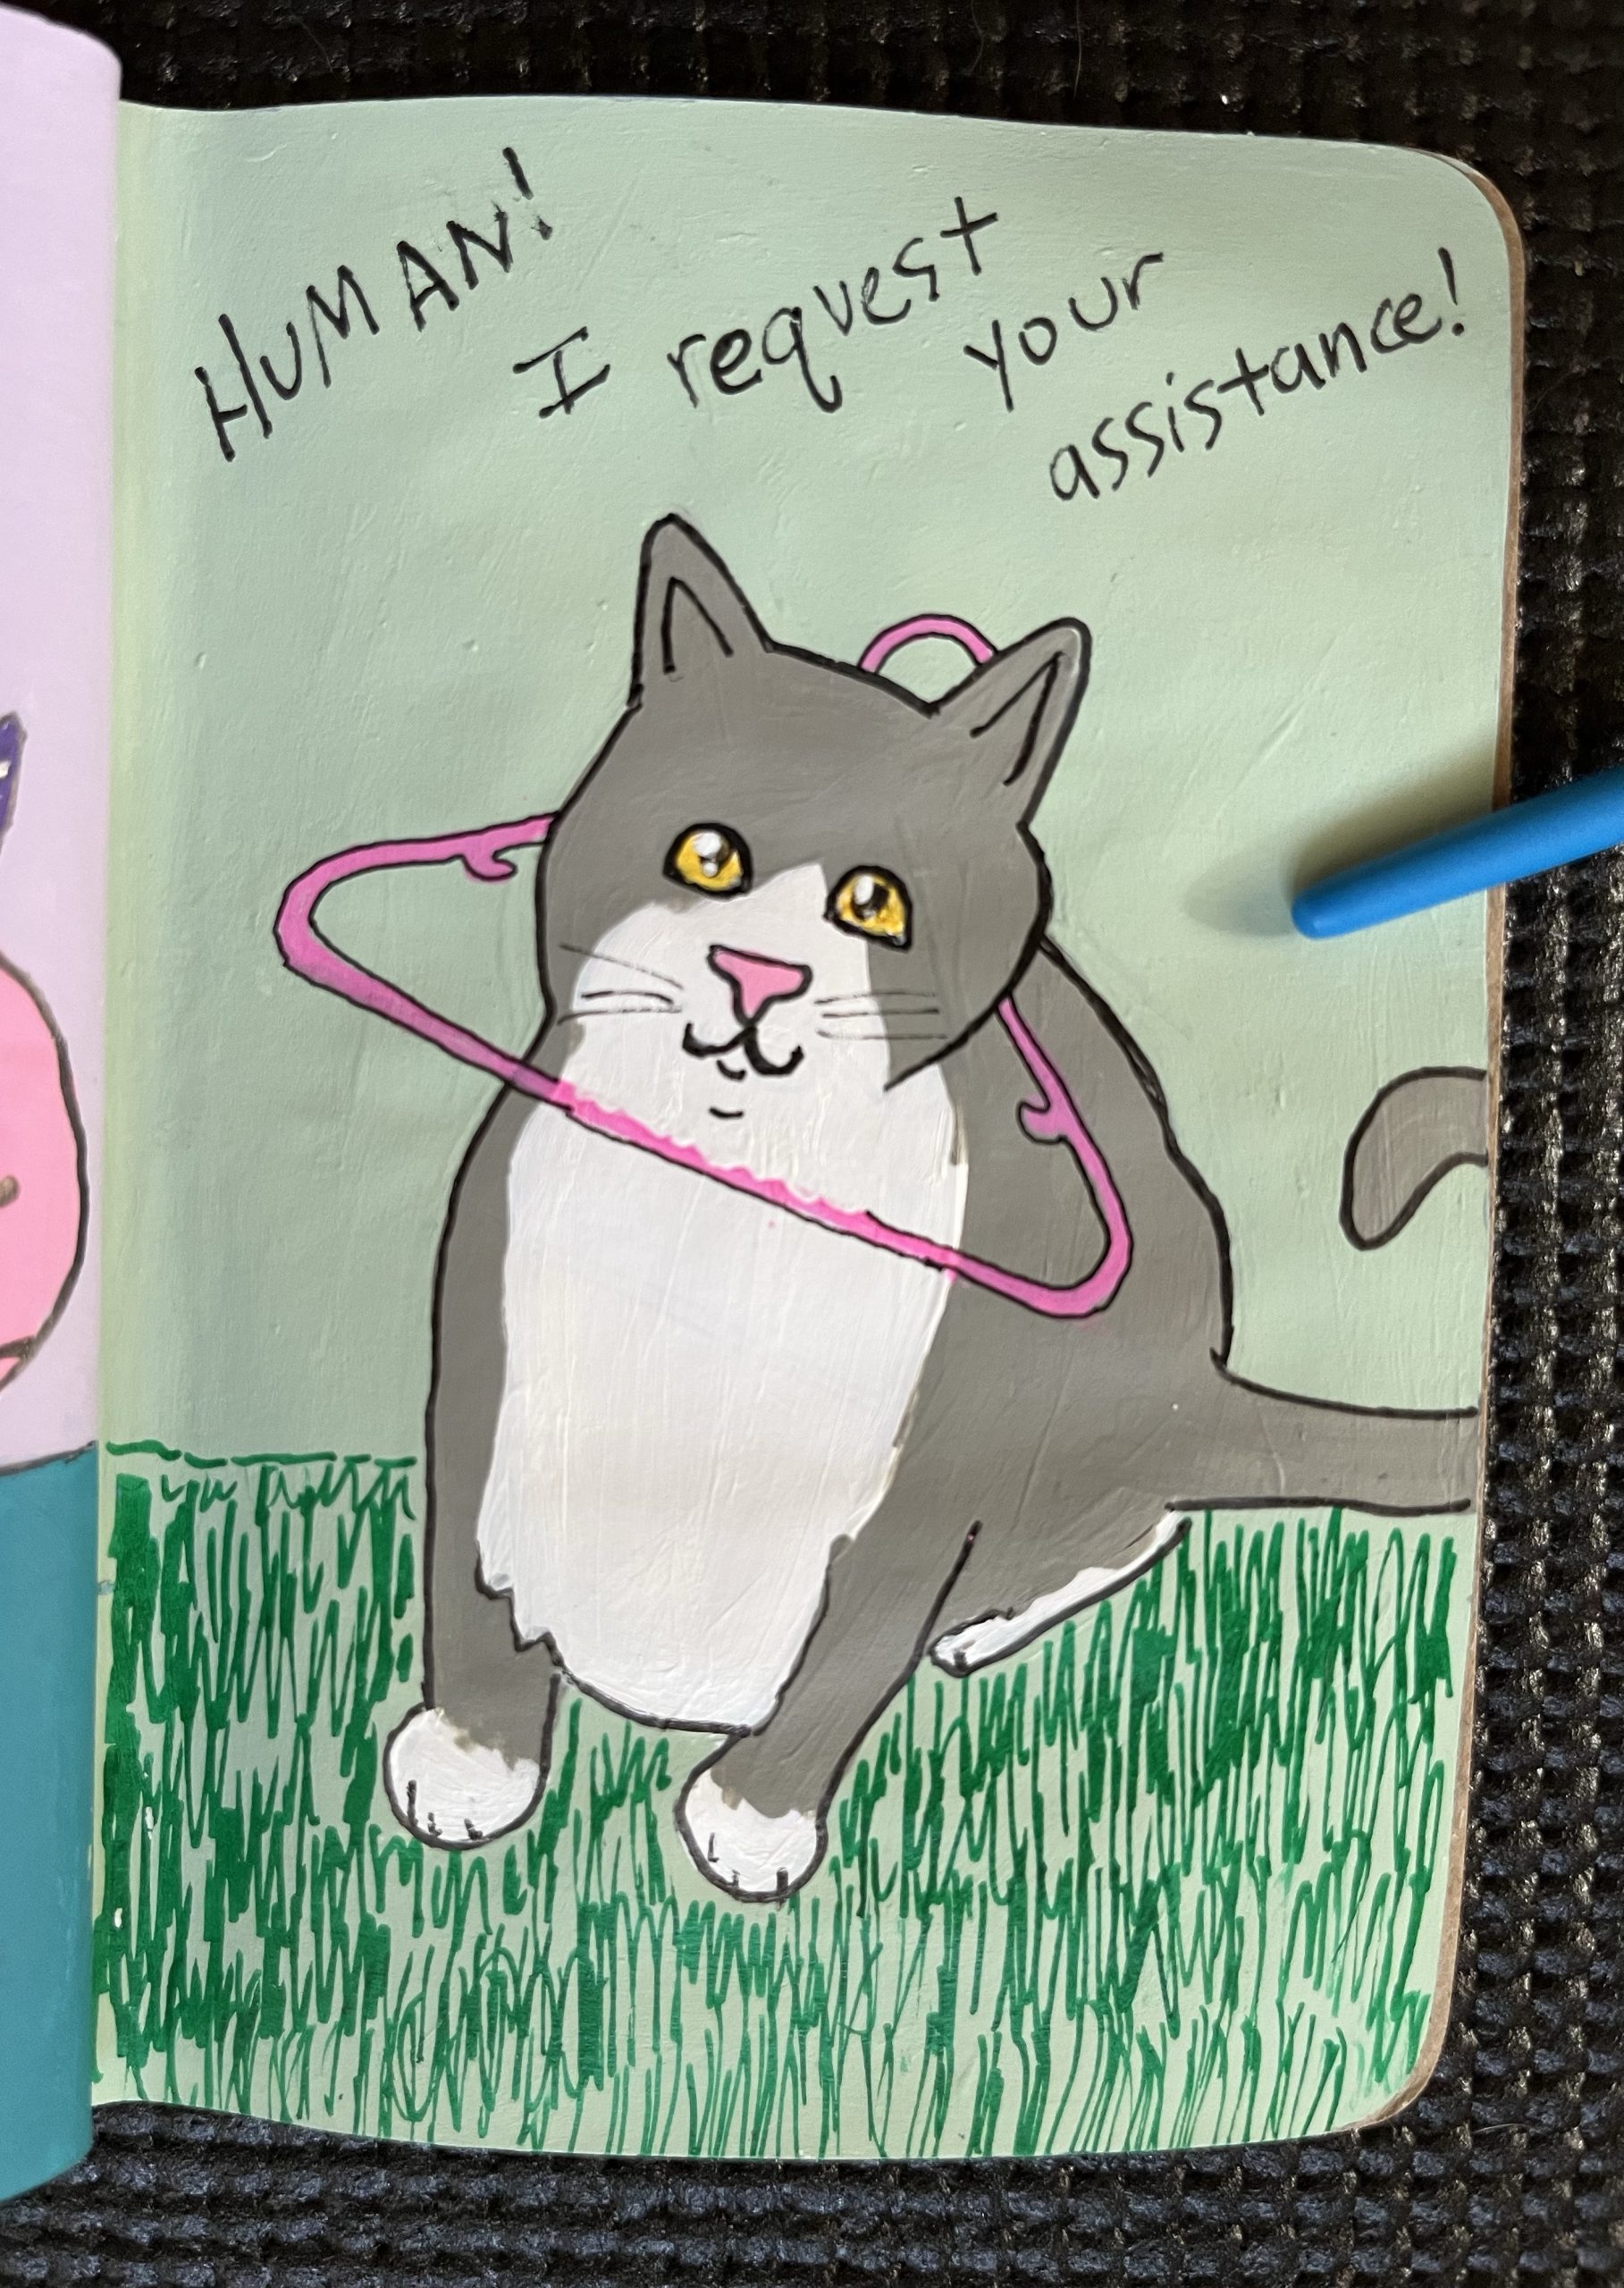 a painted page showing a cat caught in a hanger needing help meme